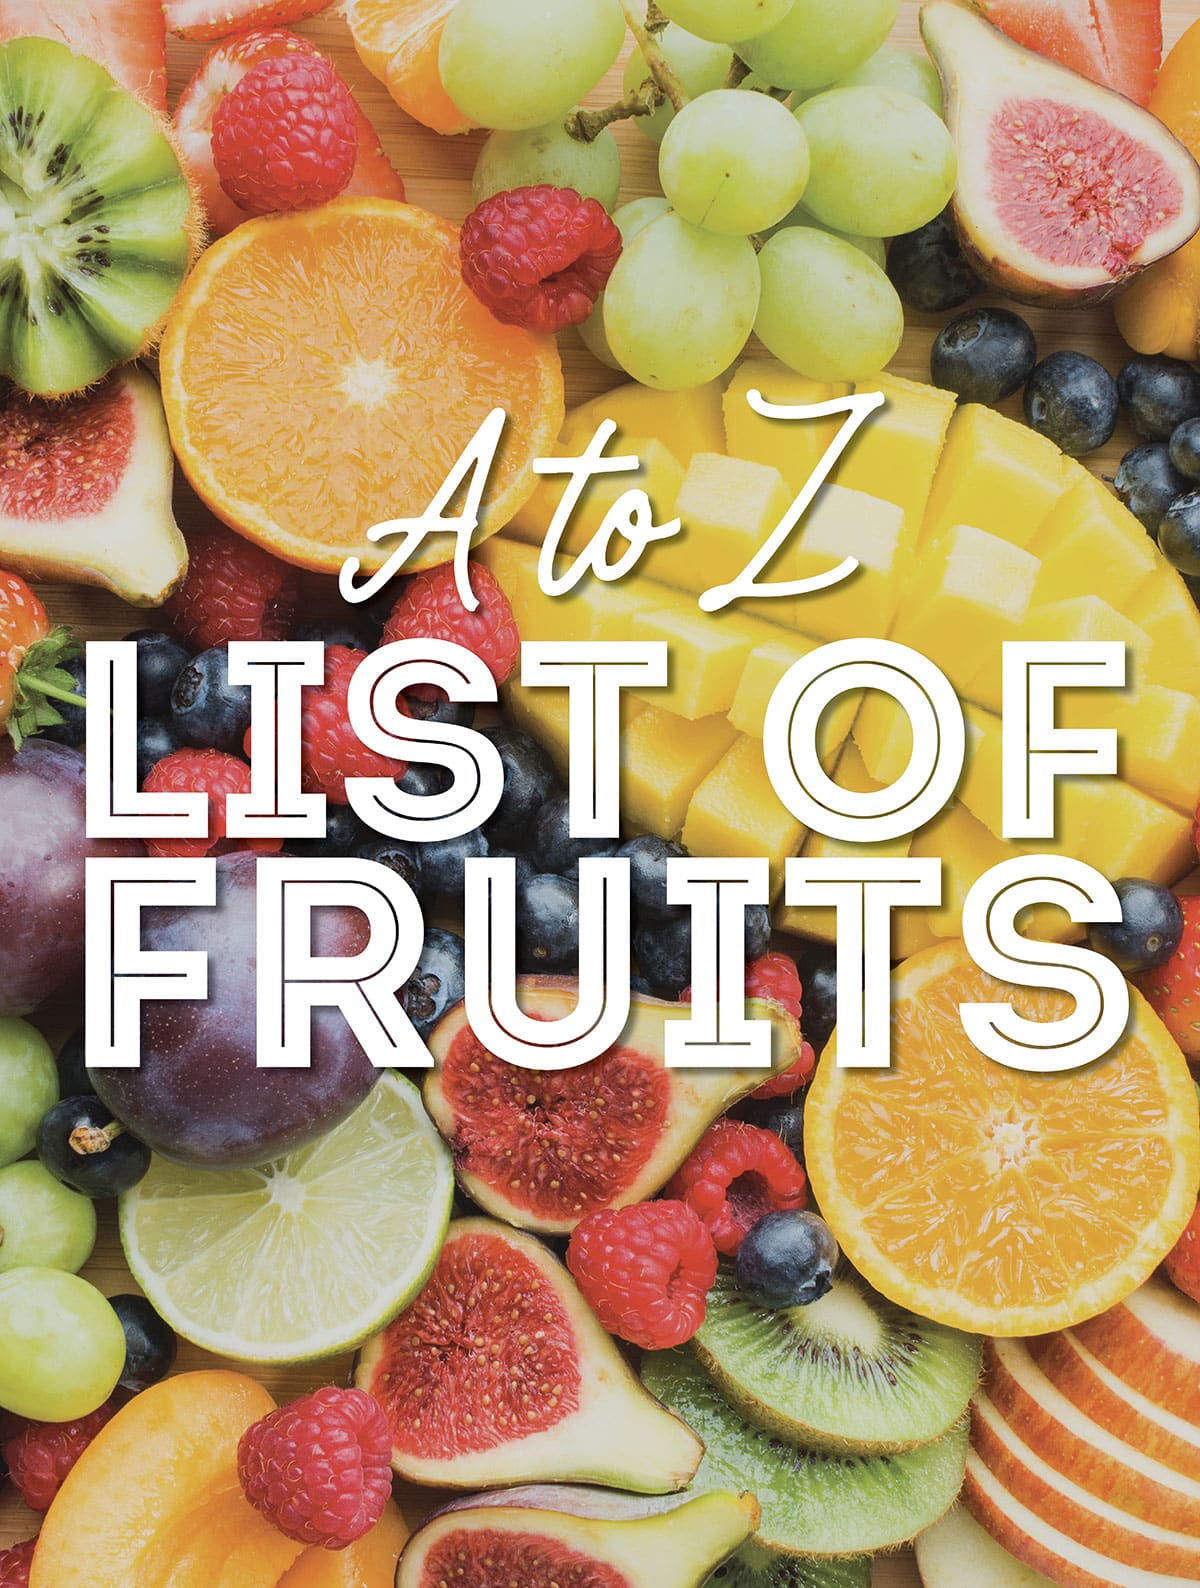 Collage that says "A to Z List Of Fruits".